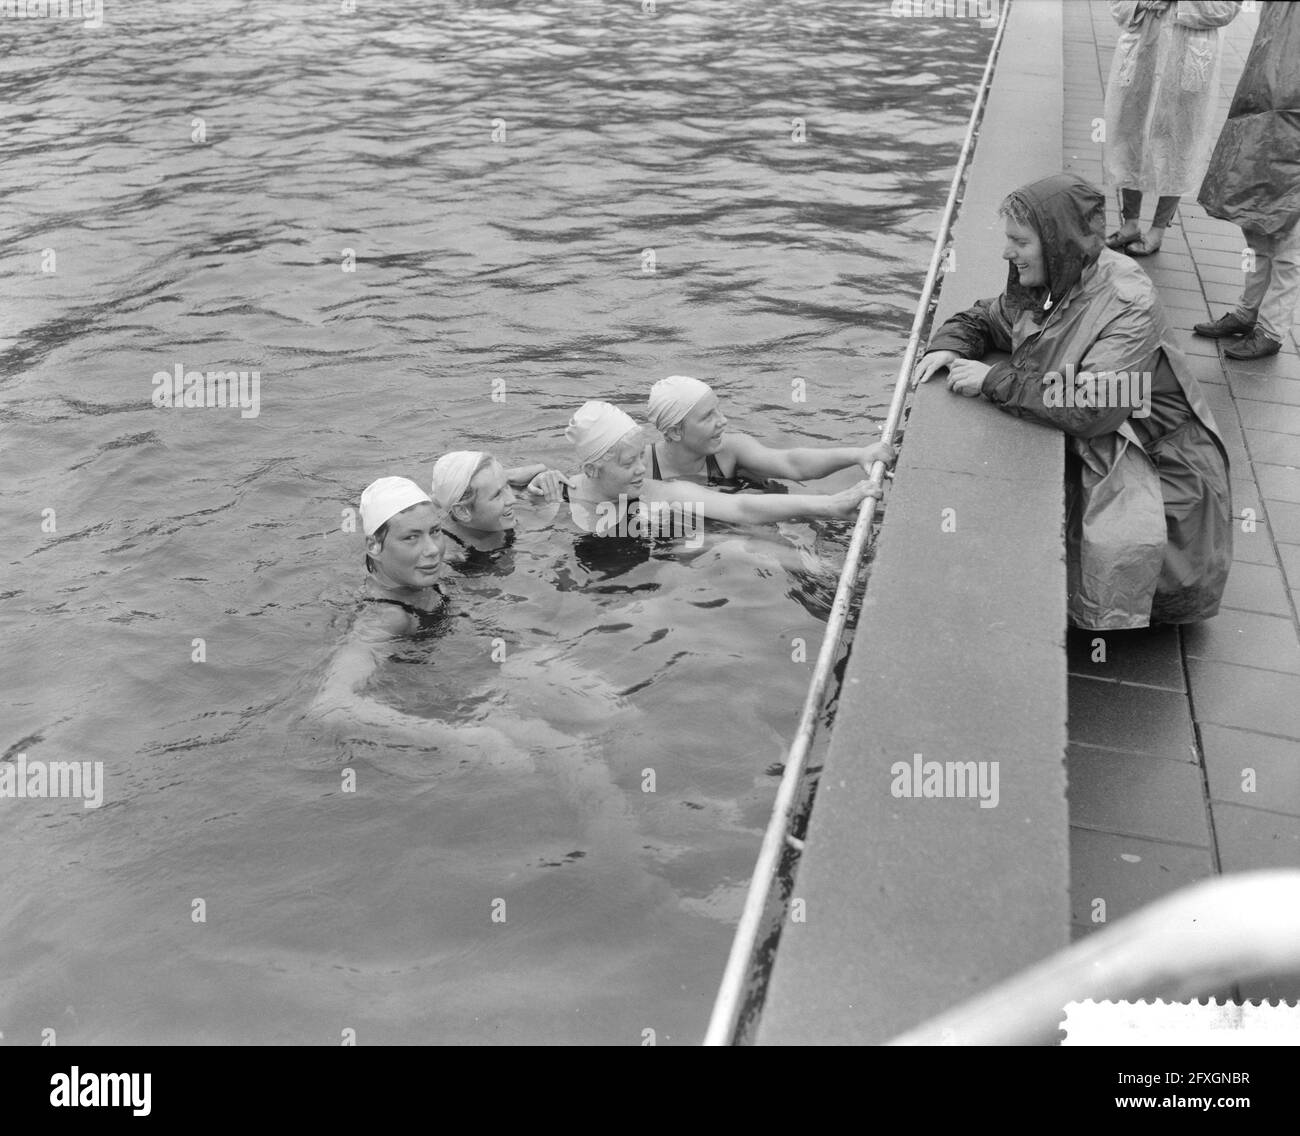 Four Naarden swimmers going to the Olympics from left to right A. den Haan, M. Heemskerk, A. Voorbij and T. Lagerberg, August 15, 1960, Olympics, The Netherlands, 20th century press agency photo, news to remember, documentary, historic photography 1945-1990, visual stories, human history of the Twentieth Century, capturing moments in time Stock Photo